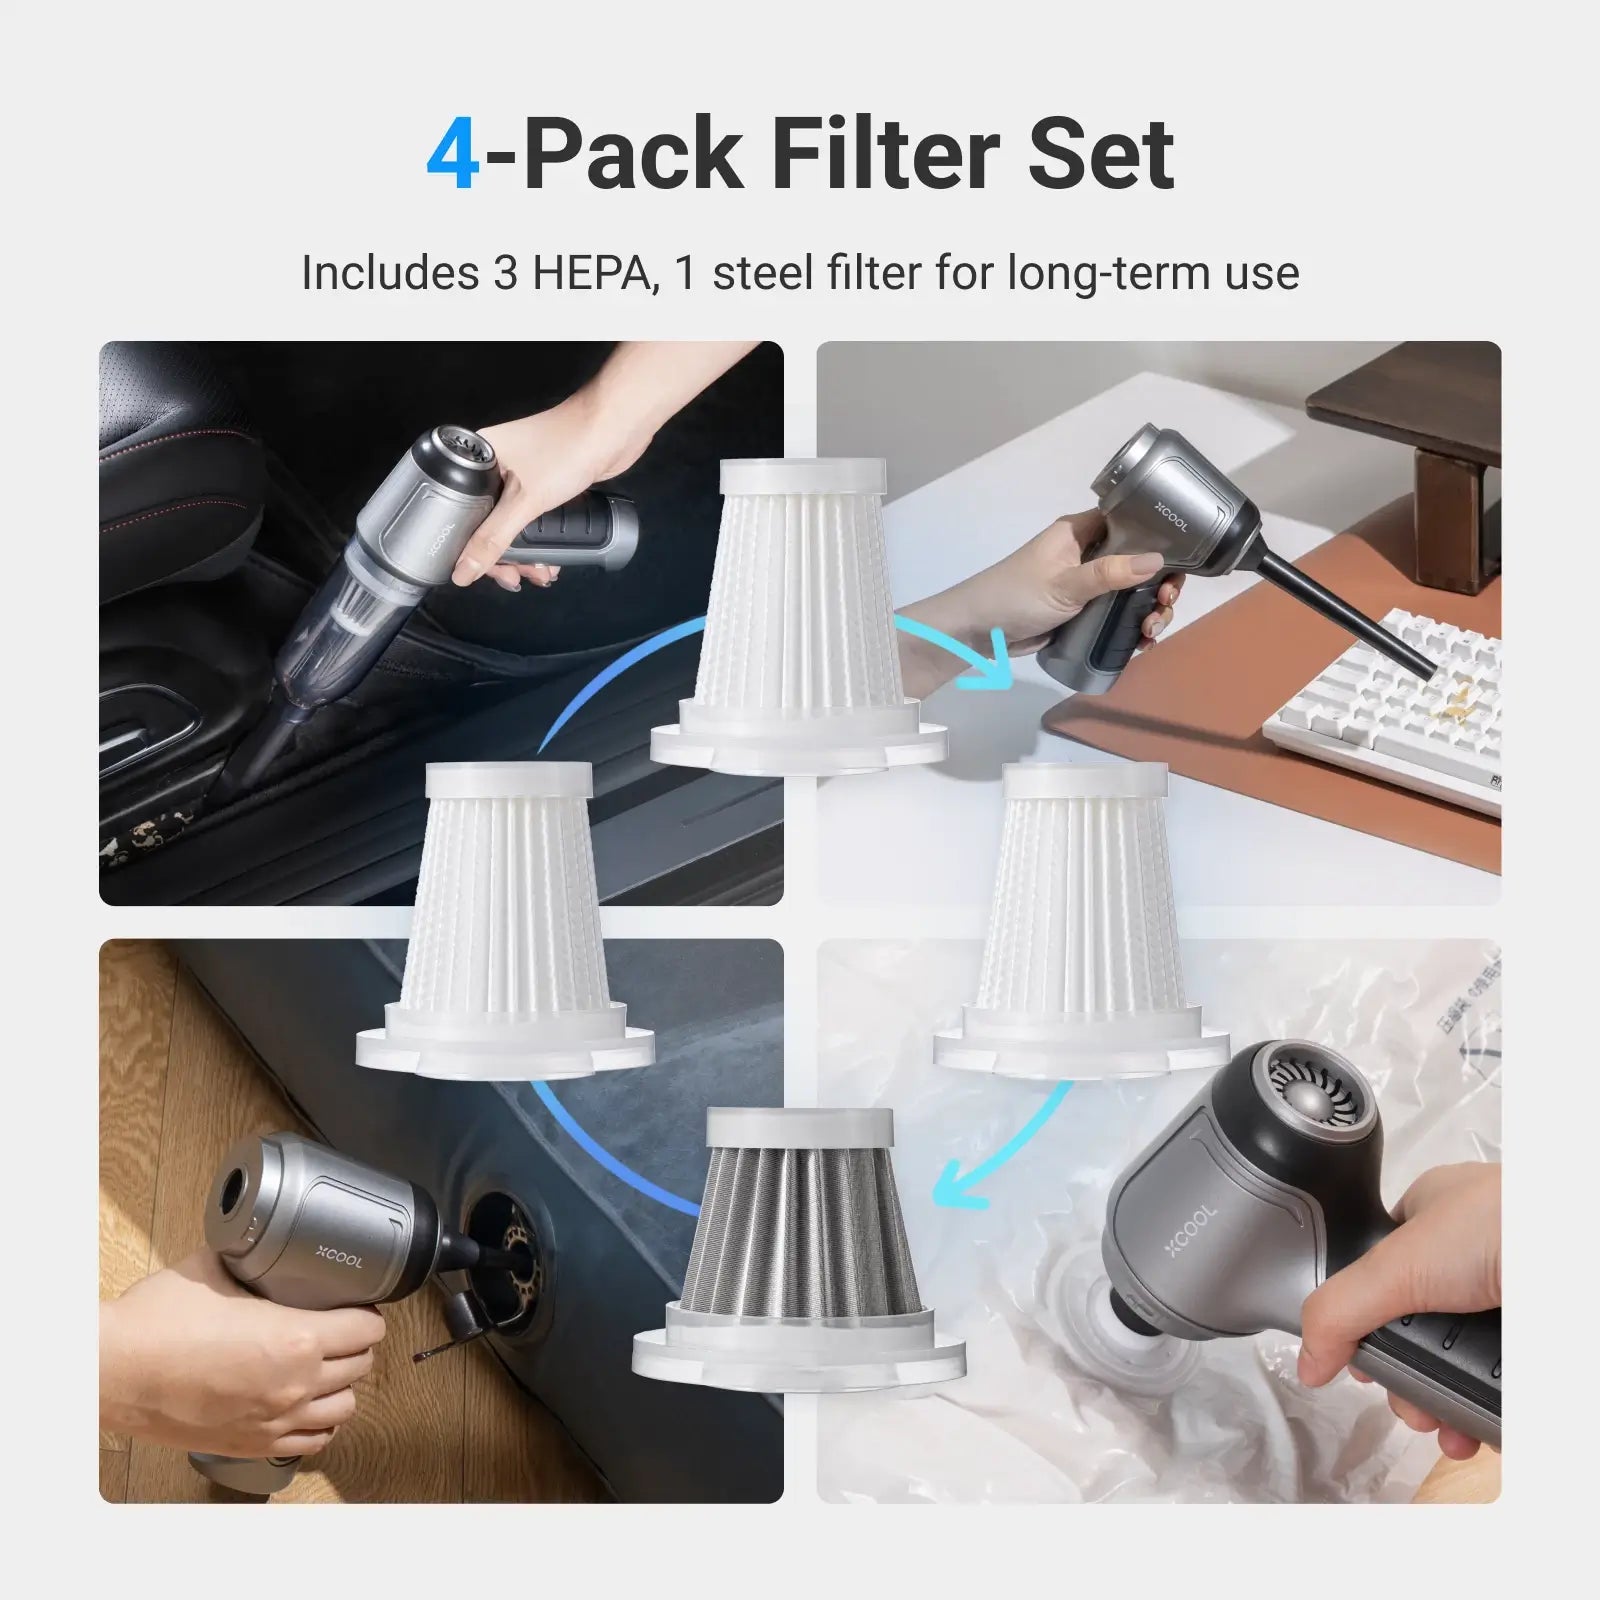 xCool Washable Vacuum Filter Replacement, Includes 3 HEPA & 1 Steel Filters